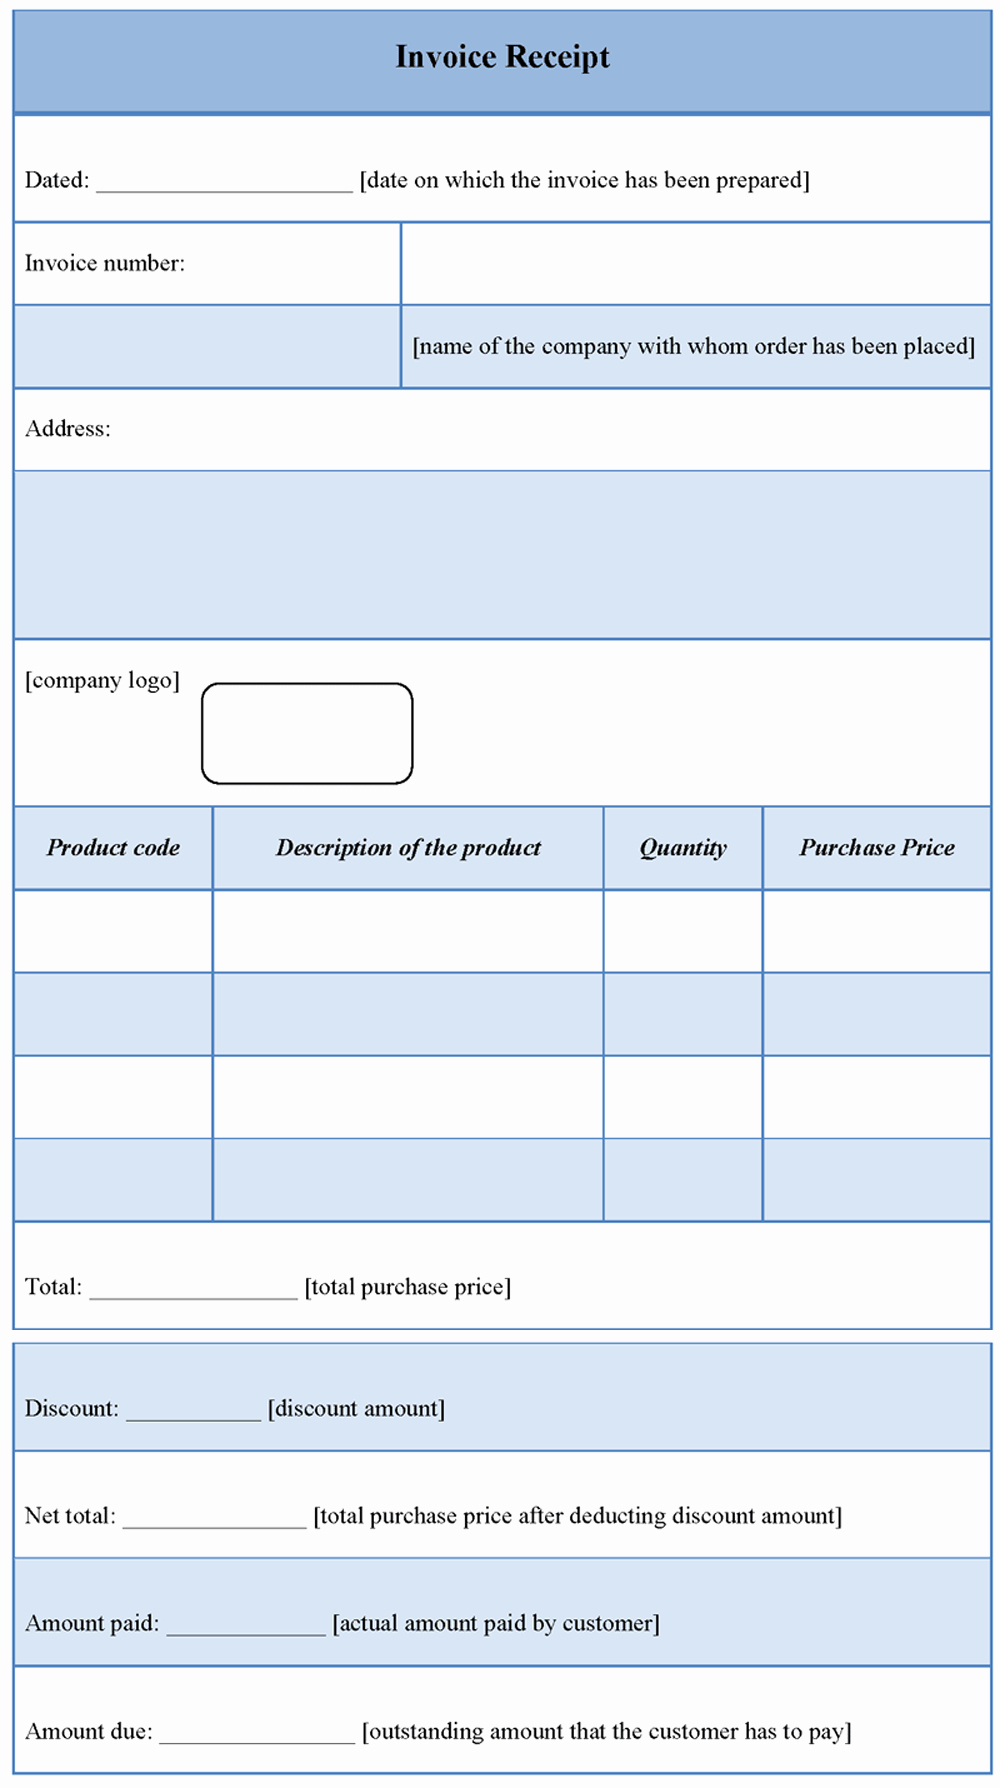 Free Invoice Receipt Template Lovely Receipt Template for Invoice Sample Of Invoice Receipt